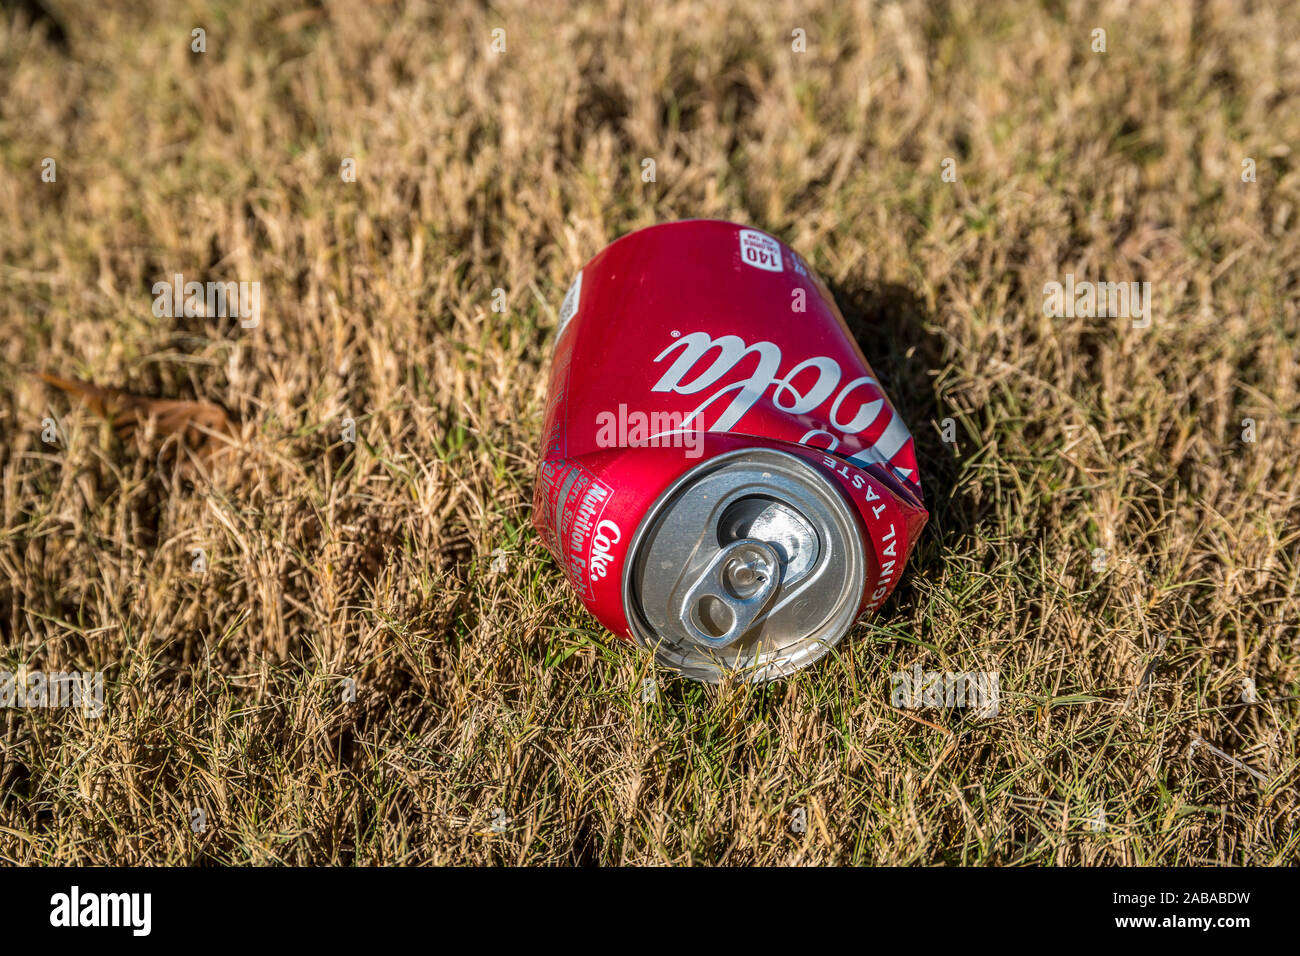 Looking straight on from the top of the crushed Coca-Cola can laying on the grass outdoors empty and discarded on the ground on a sunny day in autumn Stock Photo